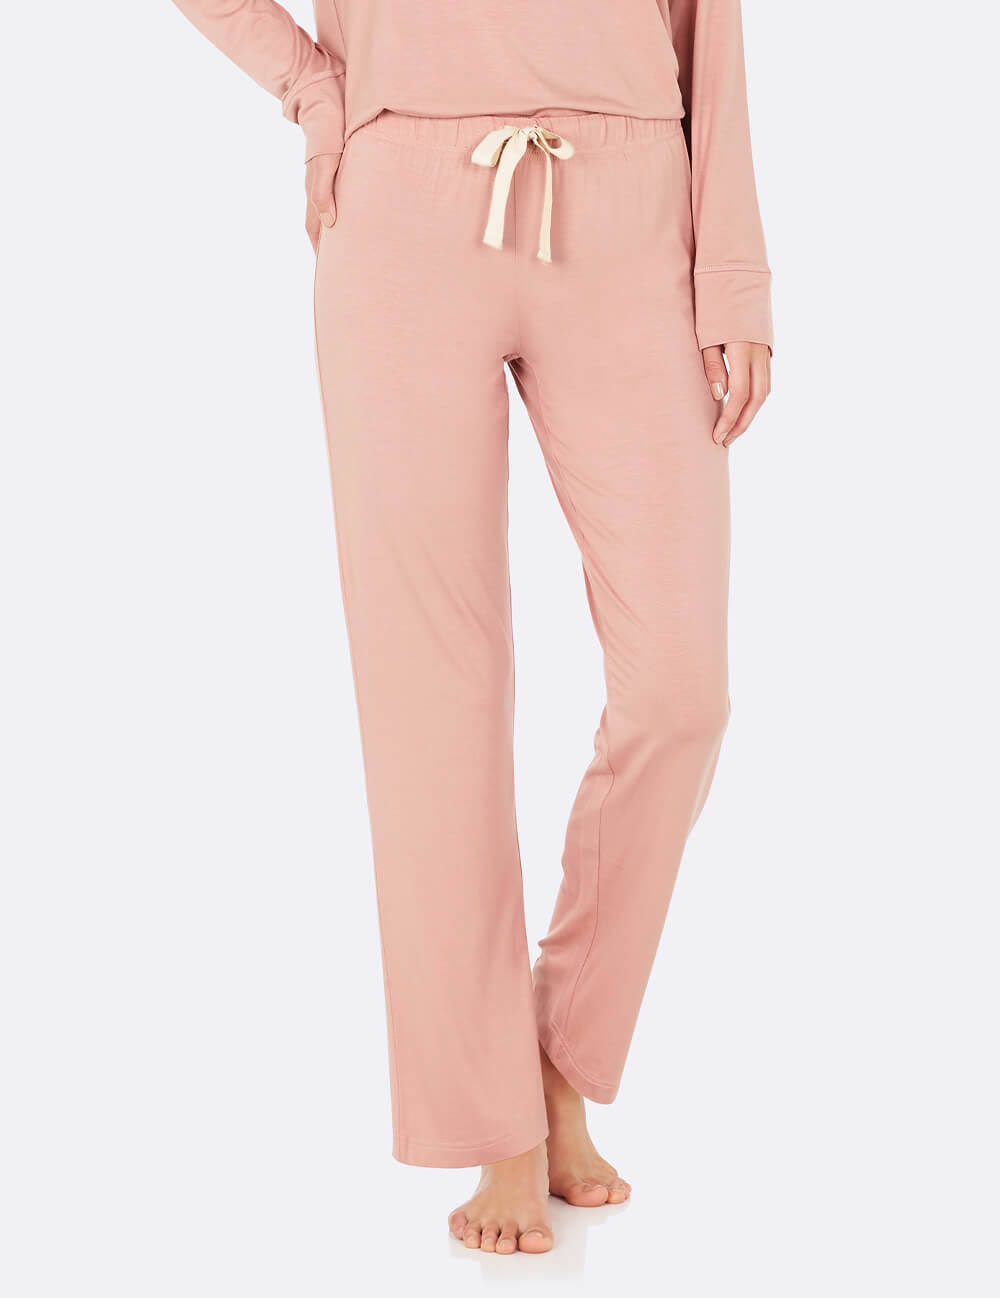 Boody | Goodnight Sleep Pant in Dusty Pink | Size XL